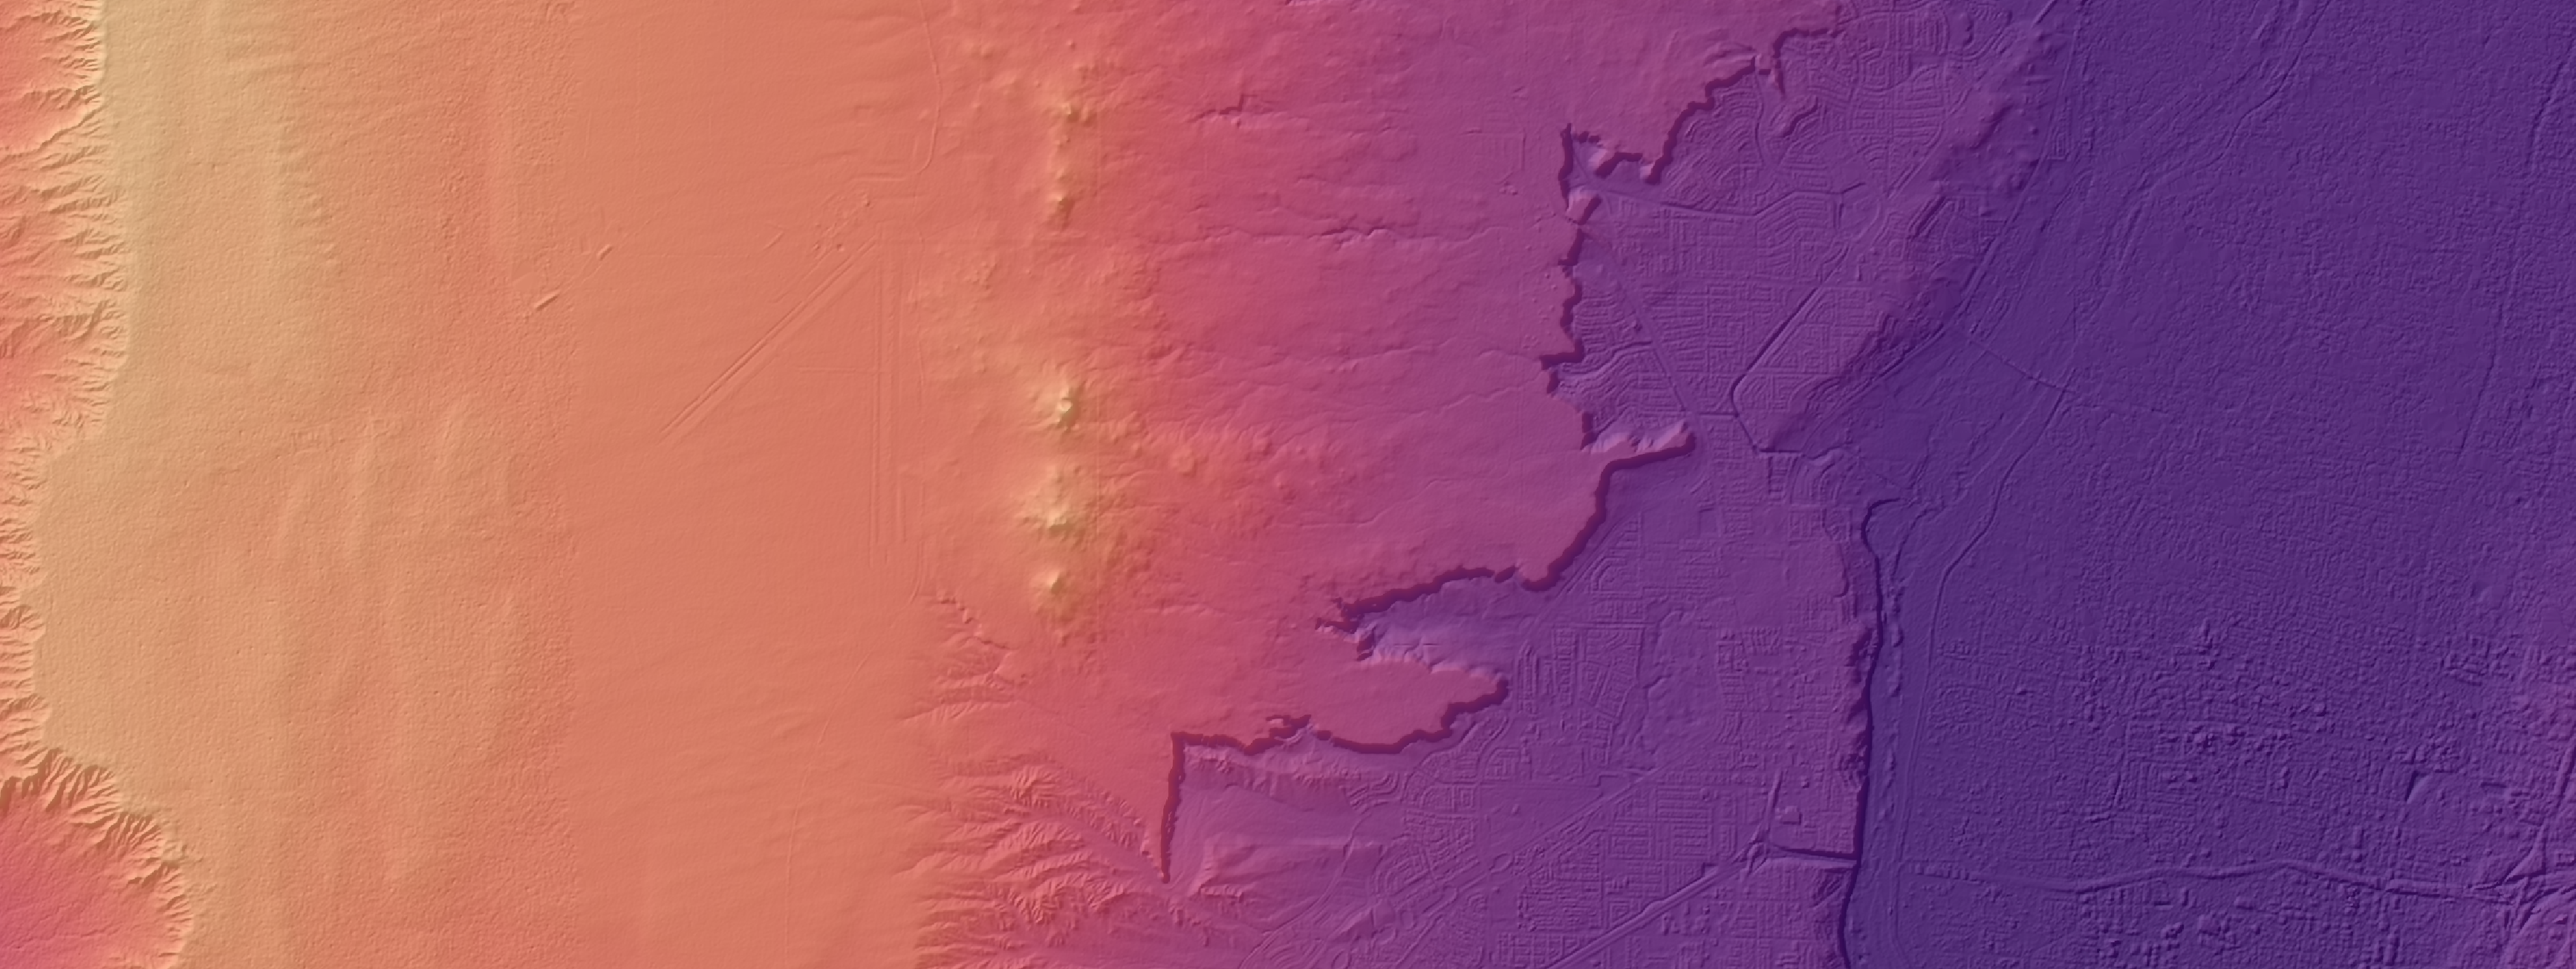 Shaded relief image of part of the Albuquerque, New Mexico, area colored with a purple-orange-yellow color ramp.